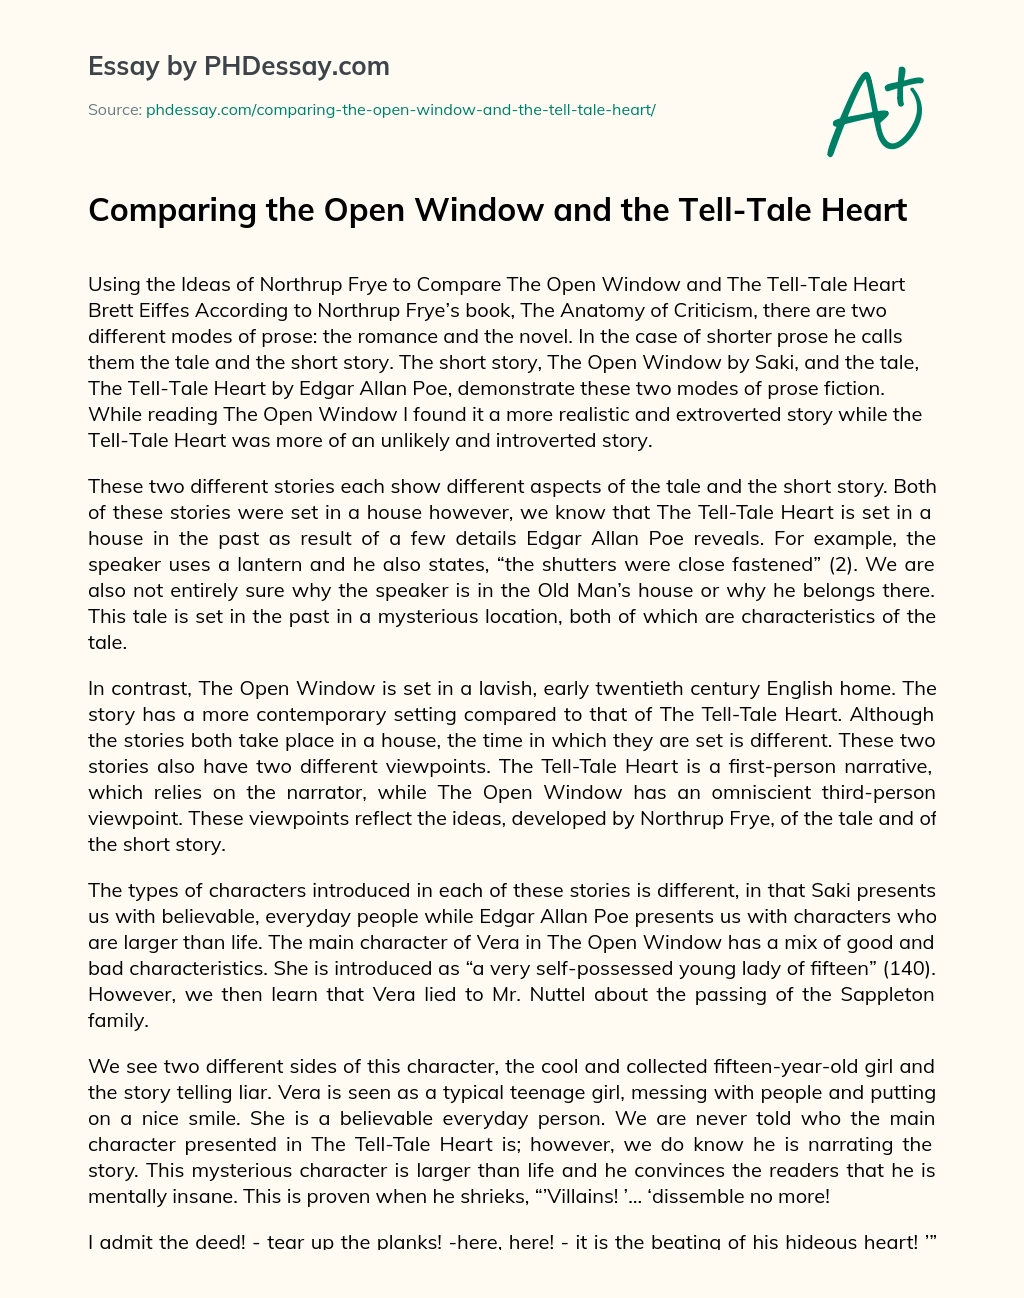 Comparing the Open Window and the Tell-Tale Heart essay